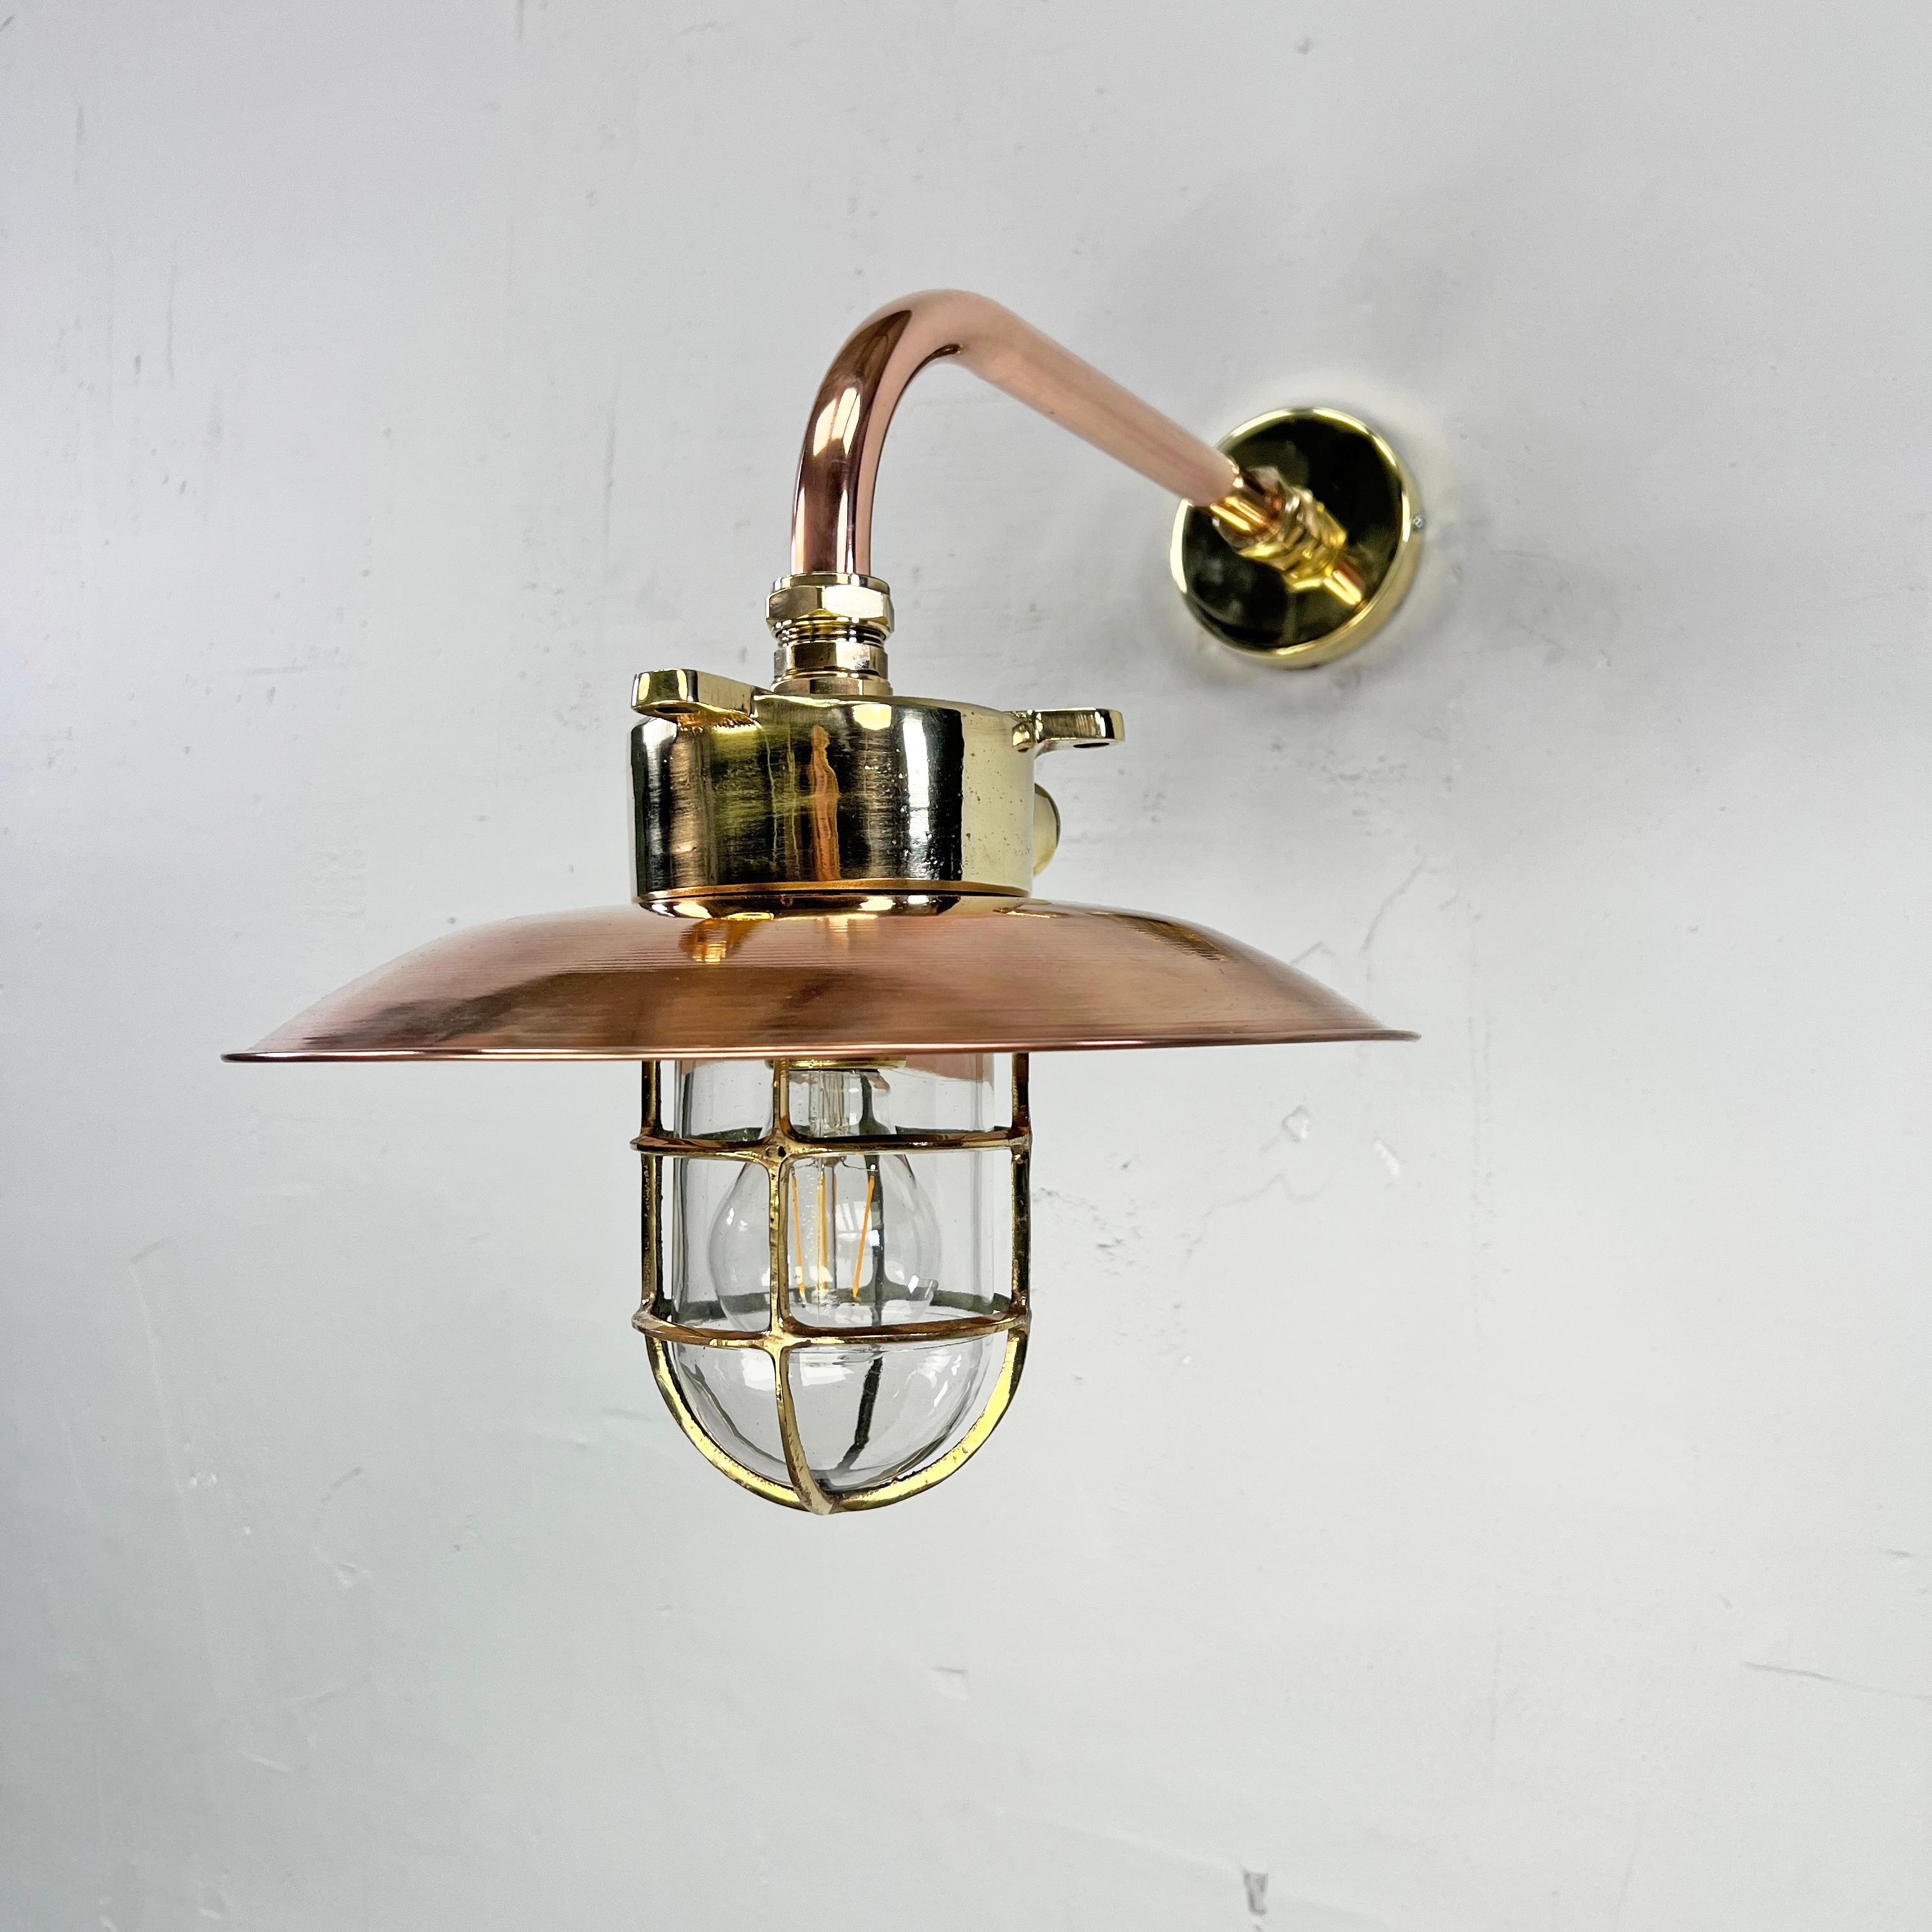 1970s Japanese Cast Brass and Copper Explosion Proof Caged Cantilever Wall Light For Sale 3